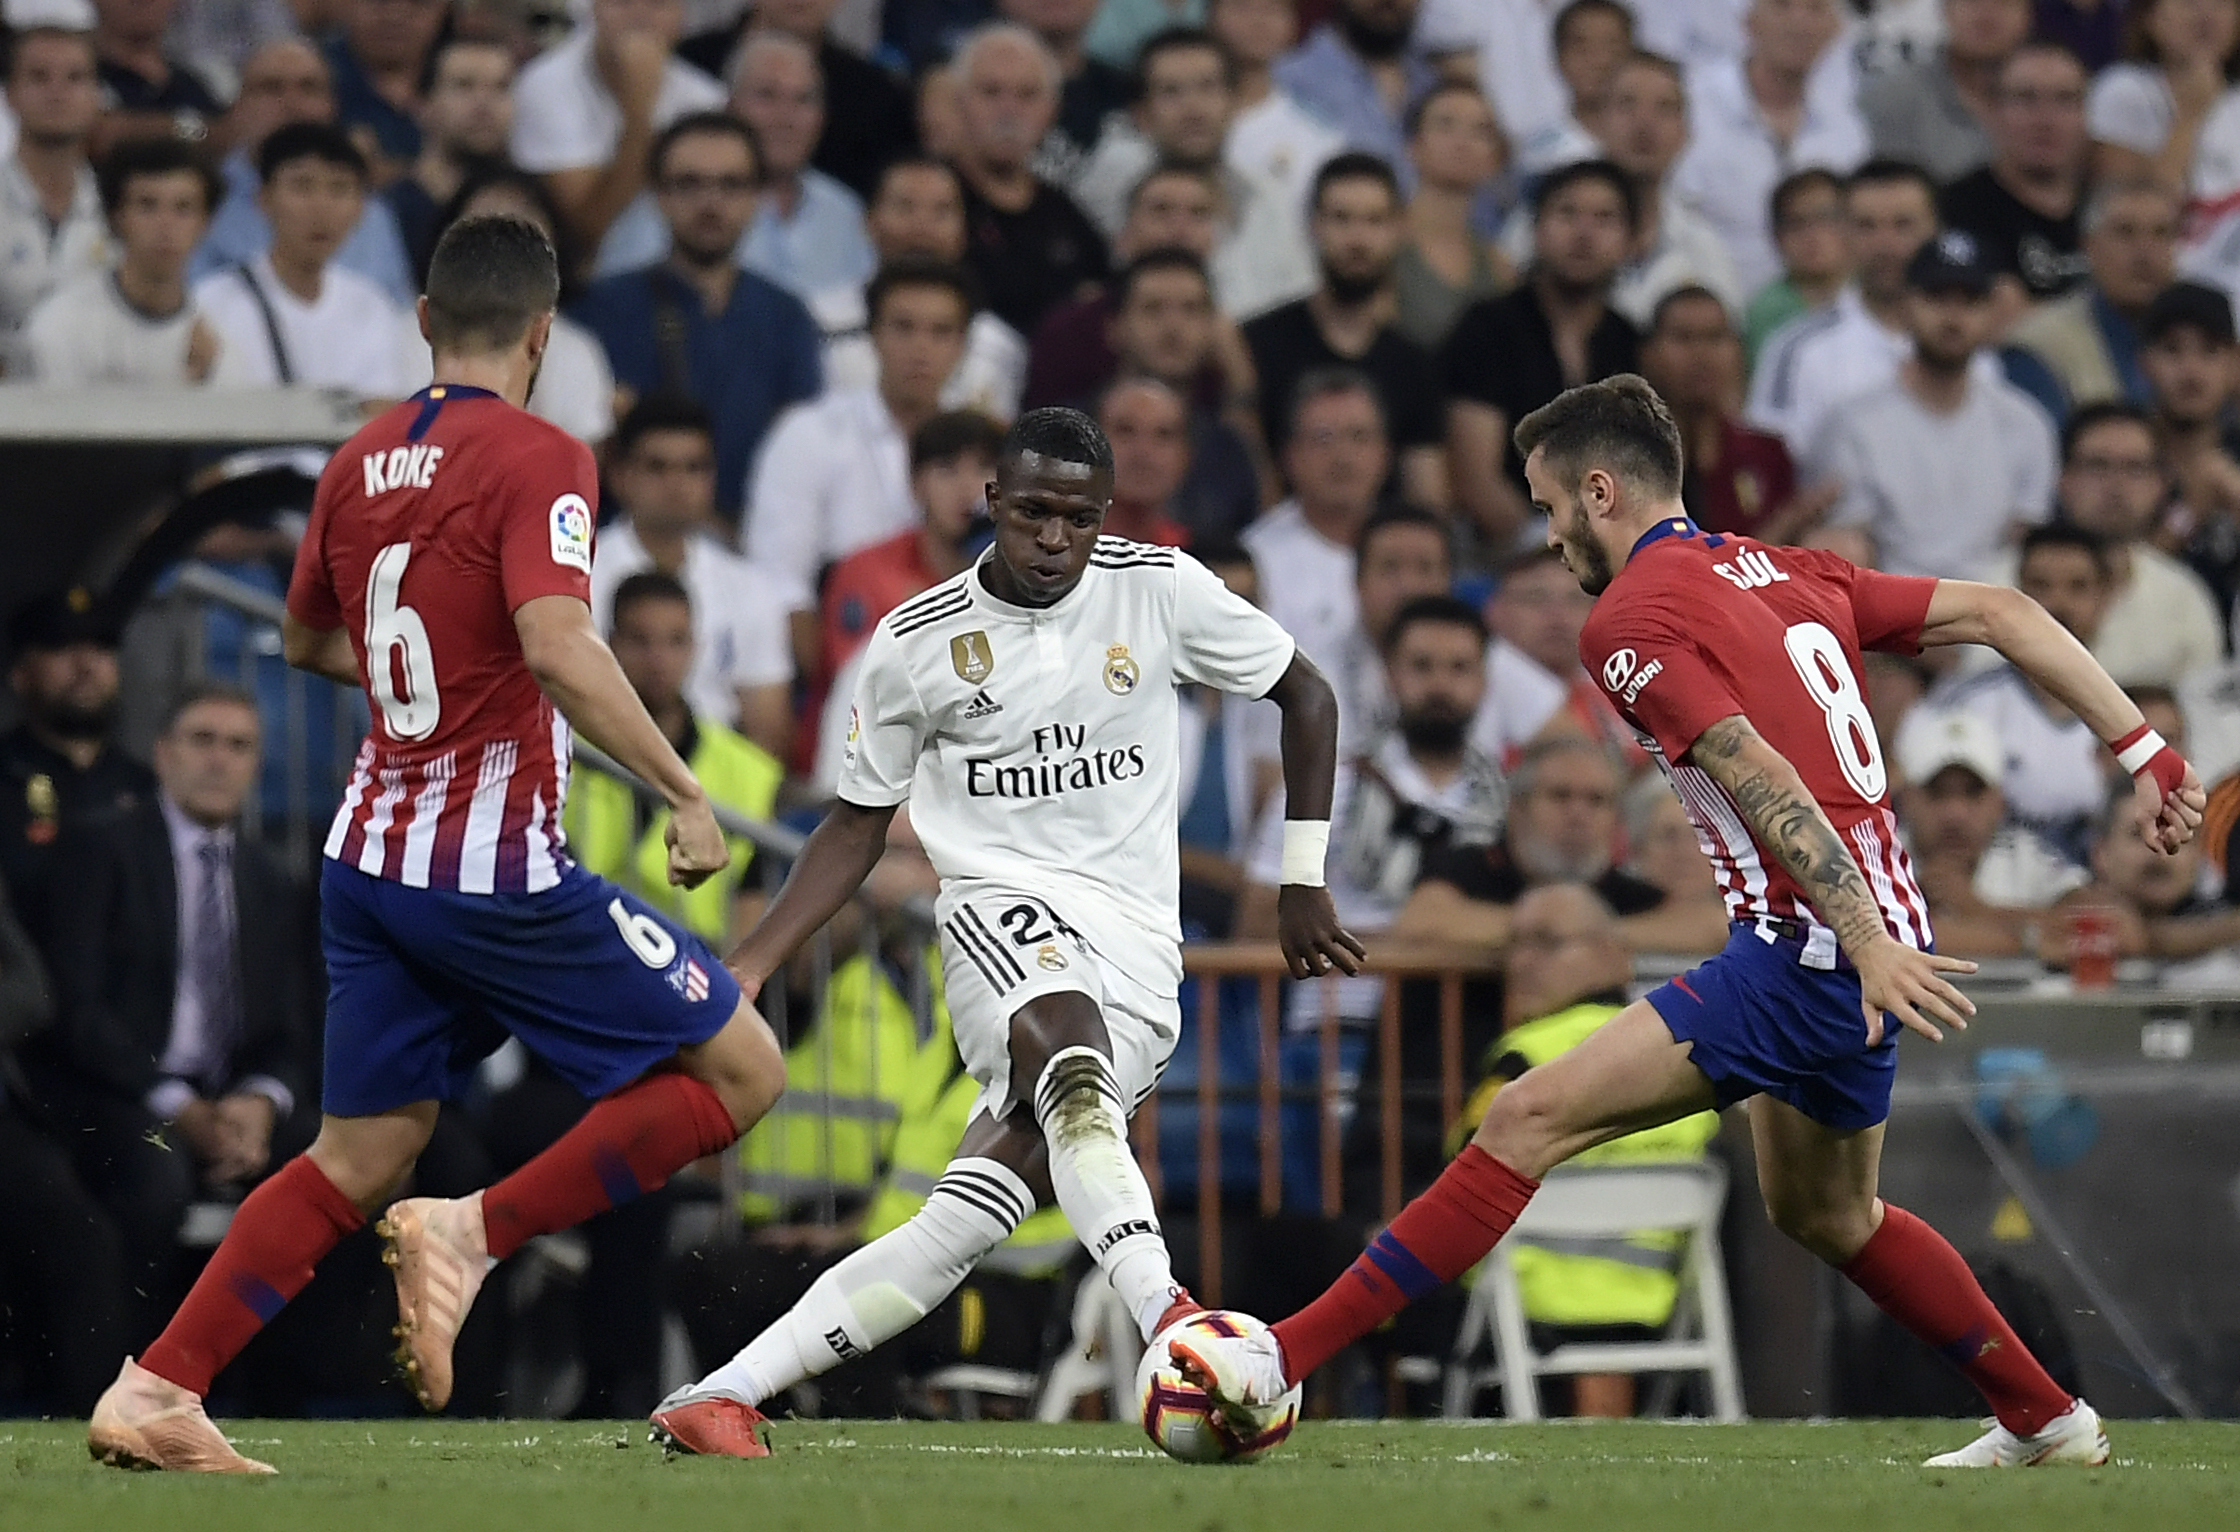 Real Madrid's Brazilian forward Vinicius Juniorv (C) vies with Atletico Madrid's Spanish midfielder Koke (L) and Atletico Madrid's Spanish midfielder Saul Niguez during the Spanish league football match between Real Madrid CF and Club Atletico de Madrid at the Santiago Bernabeu stadium in Madrid on September 29, 2018. (Photo by OSCAR DEL POZO / AFP)        (Photo credit should read OSCAR DEL POZO/AFP/Getty Images)